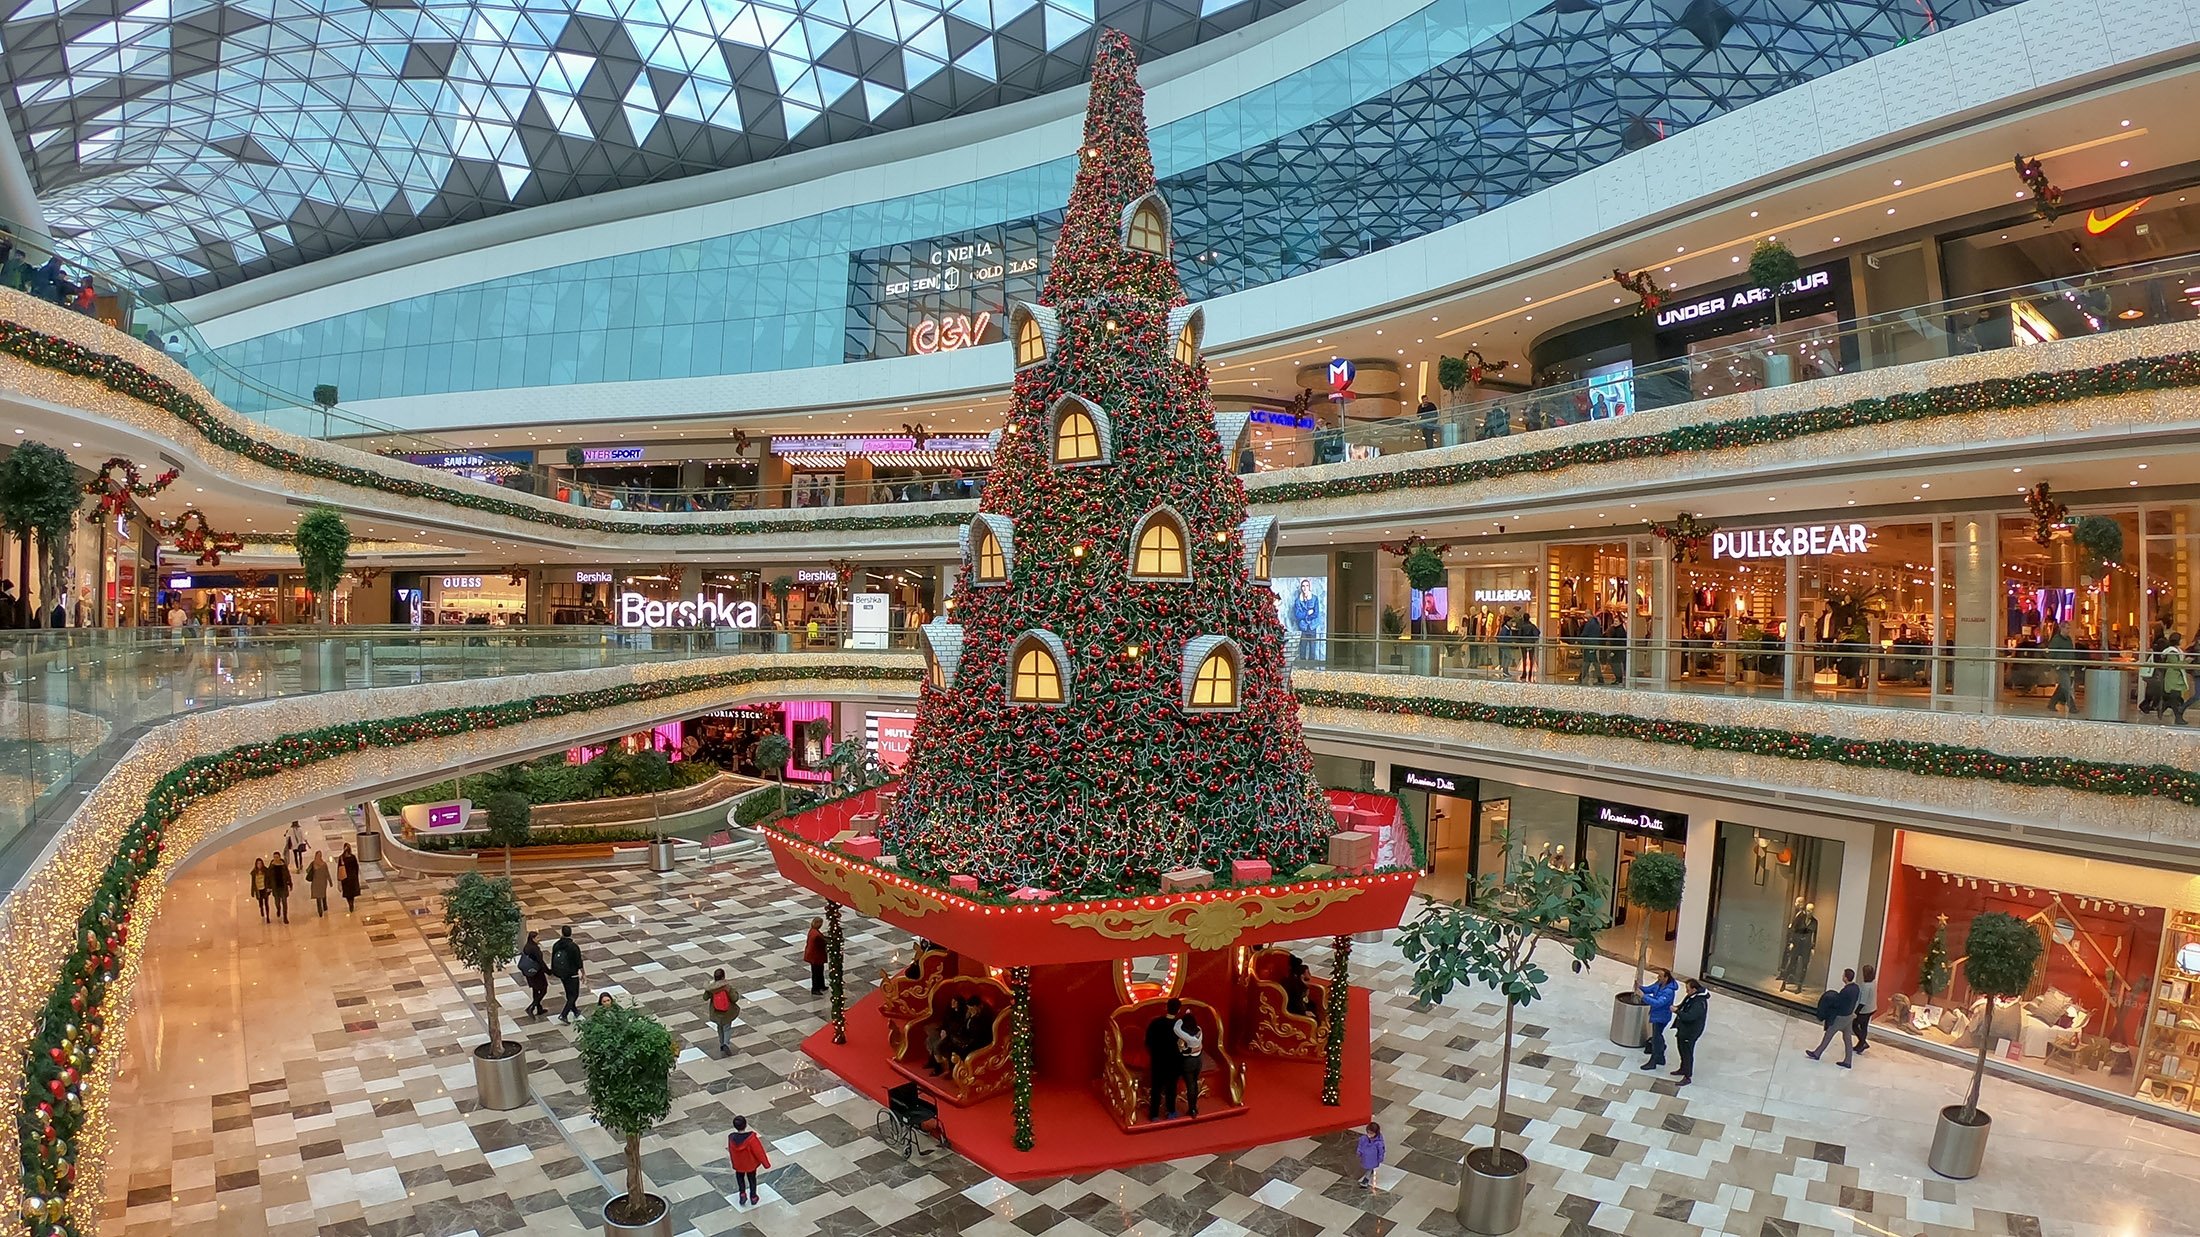 New Years decorations with a huge Christmas tree in Vadistanbul shopping mall. (Shutterstock Photo)